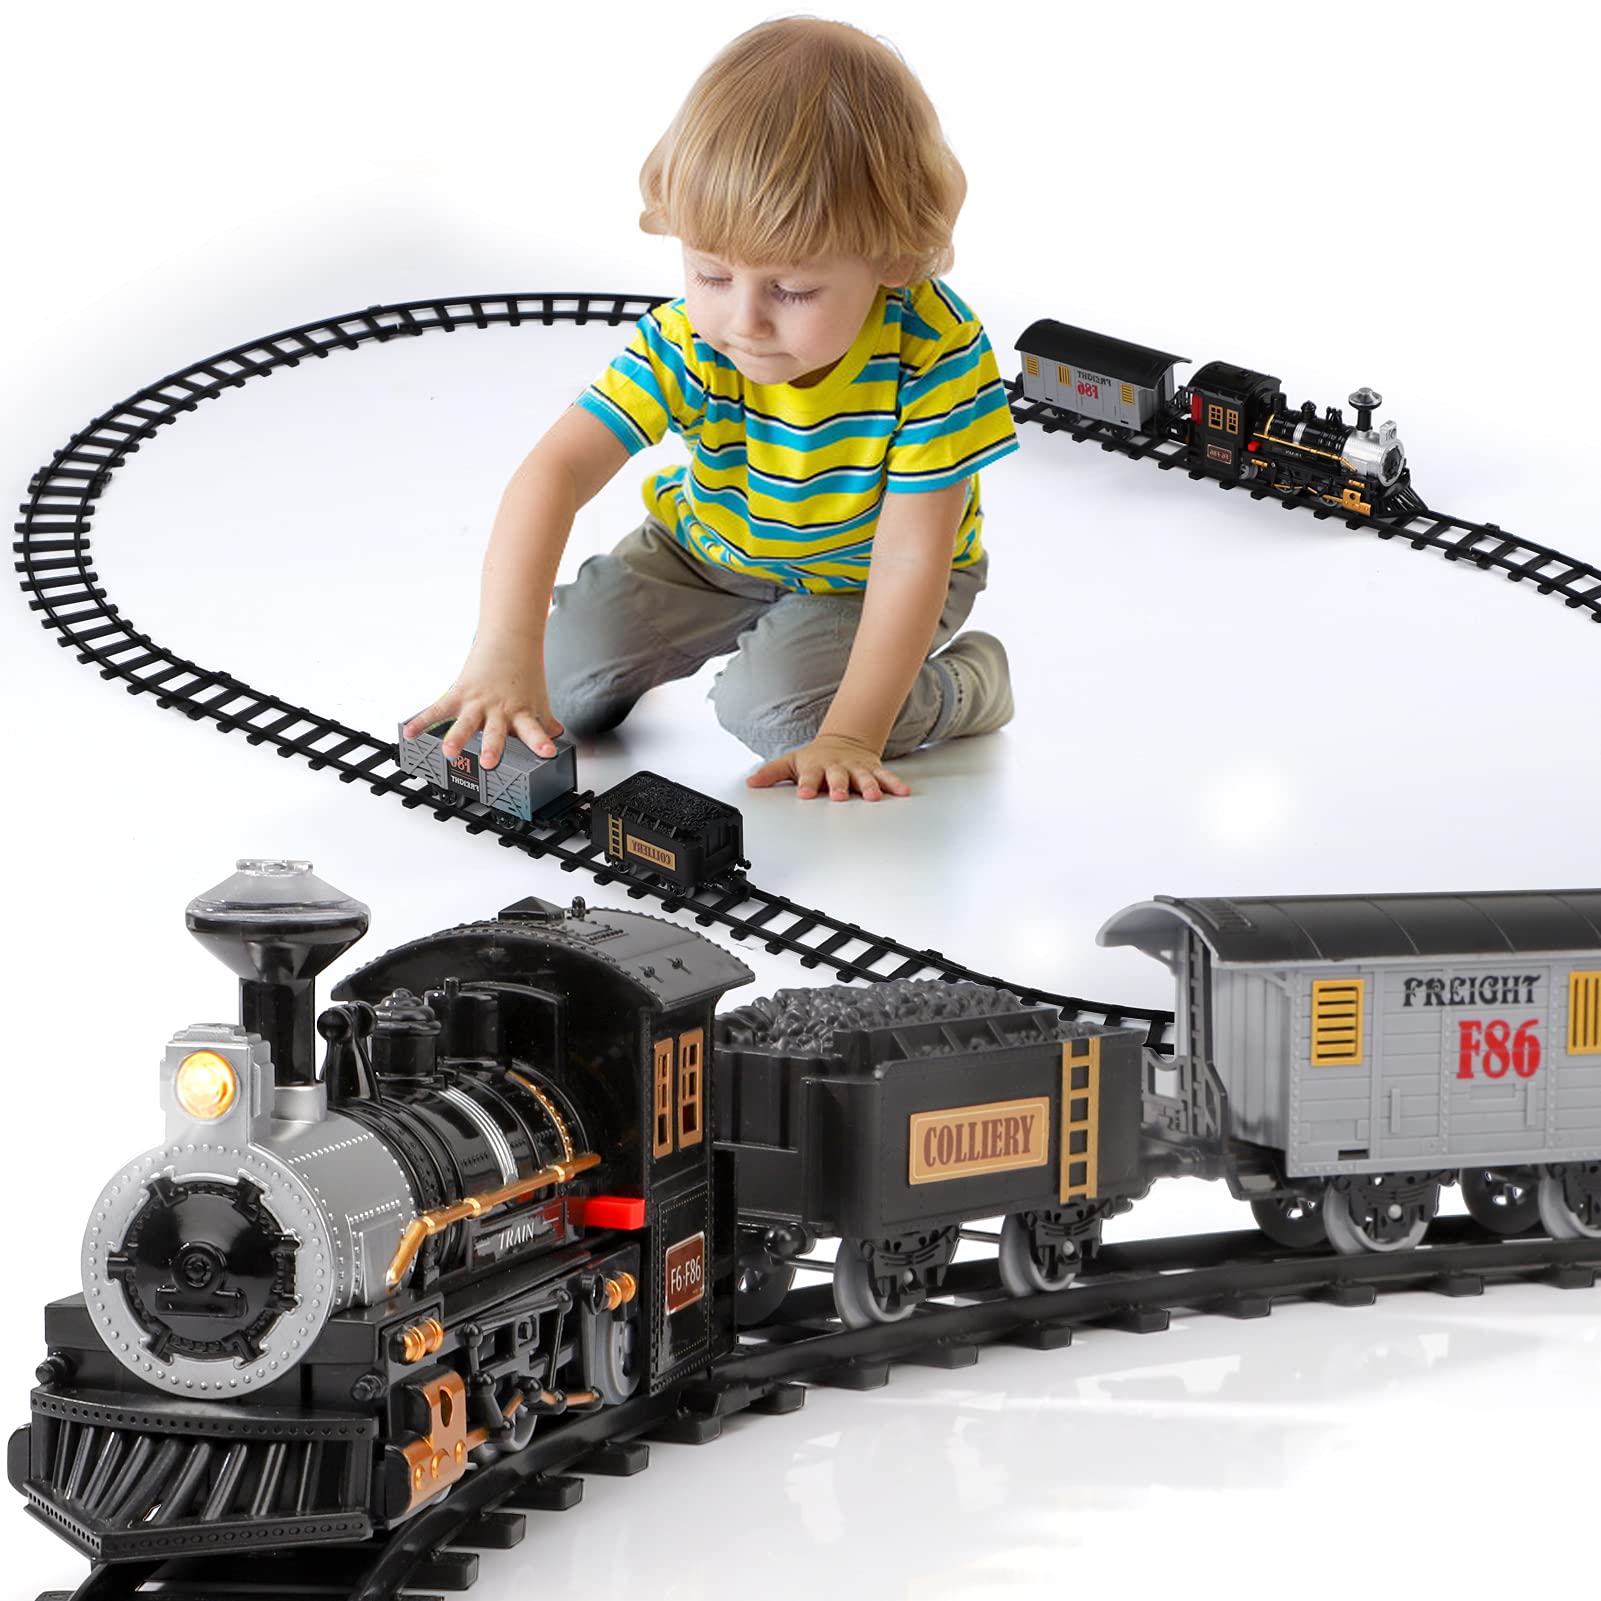 Lucky Doug Electric Train Set for Kids, Battery-Powered christmas Train Set with Sounds Include 4 cars and 10 Tracks, classic To